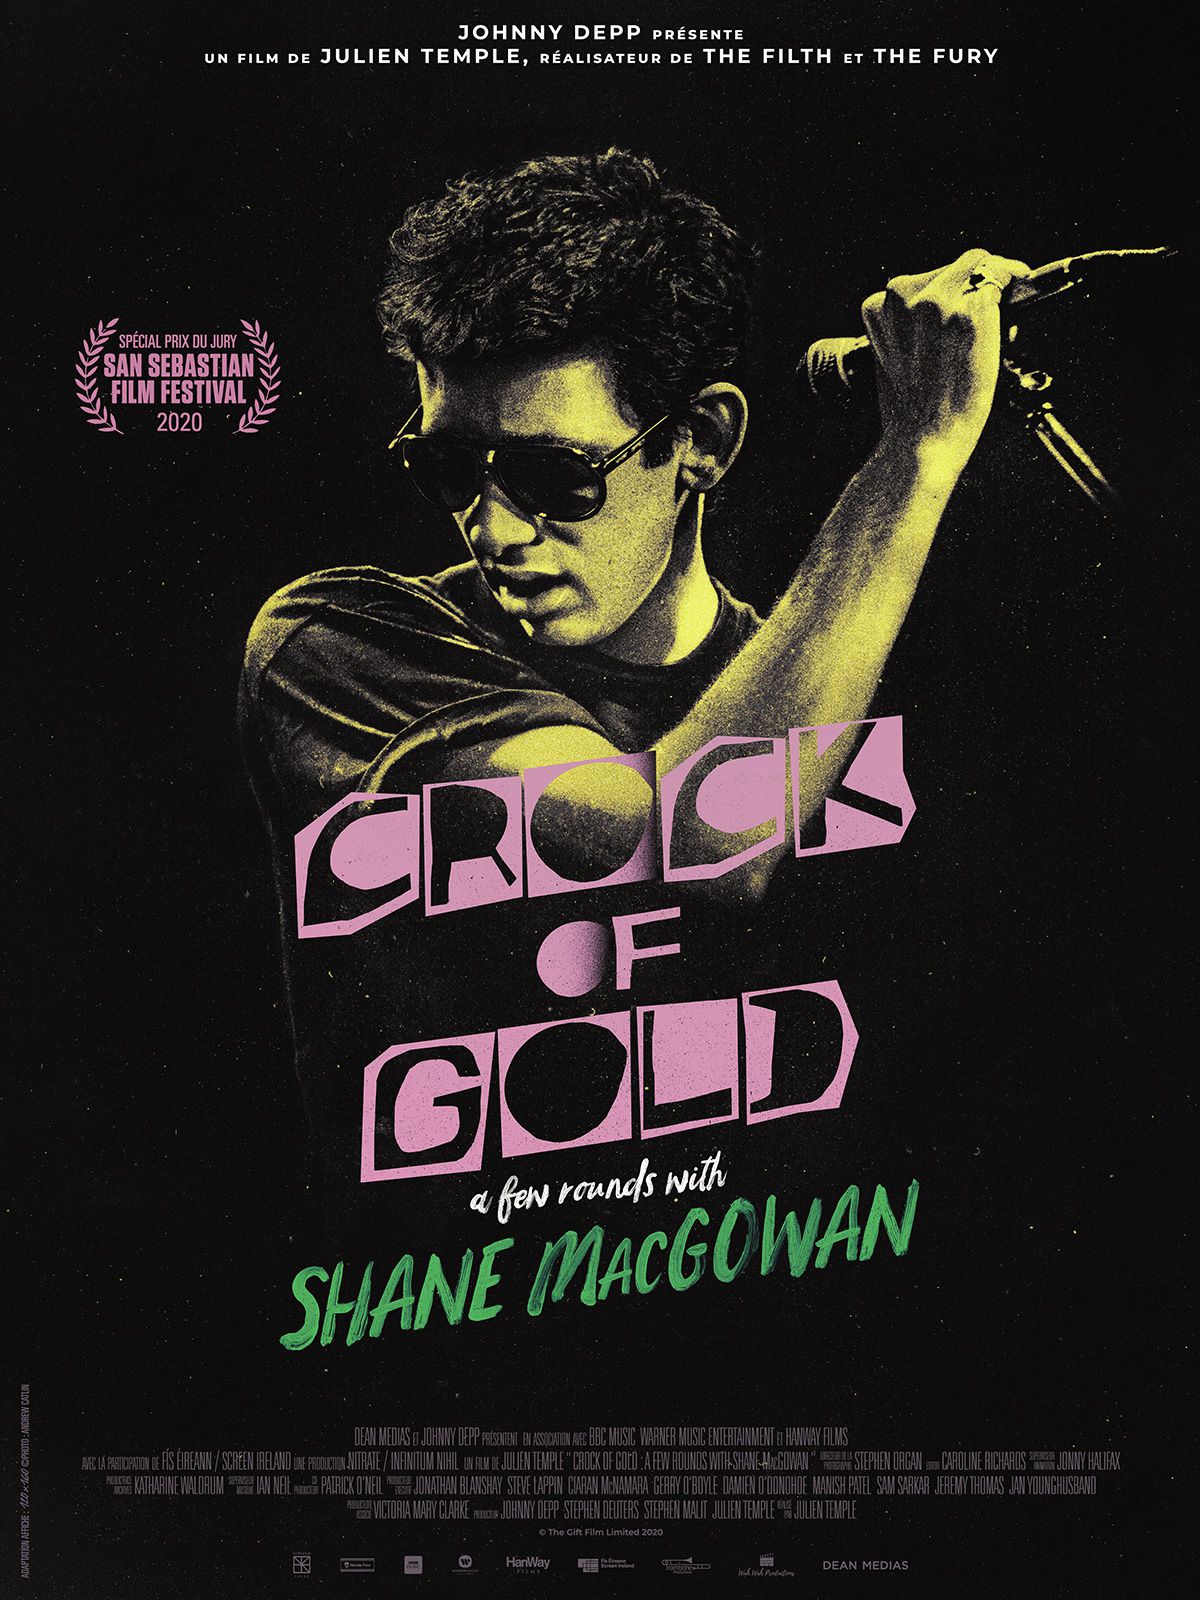 Film Crock of Gold - Documentaire (2021)